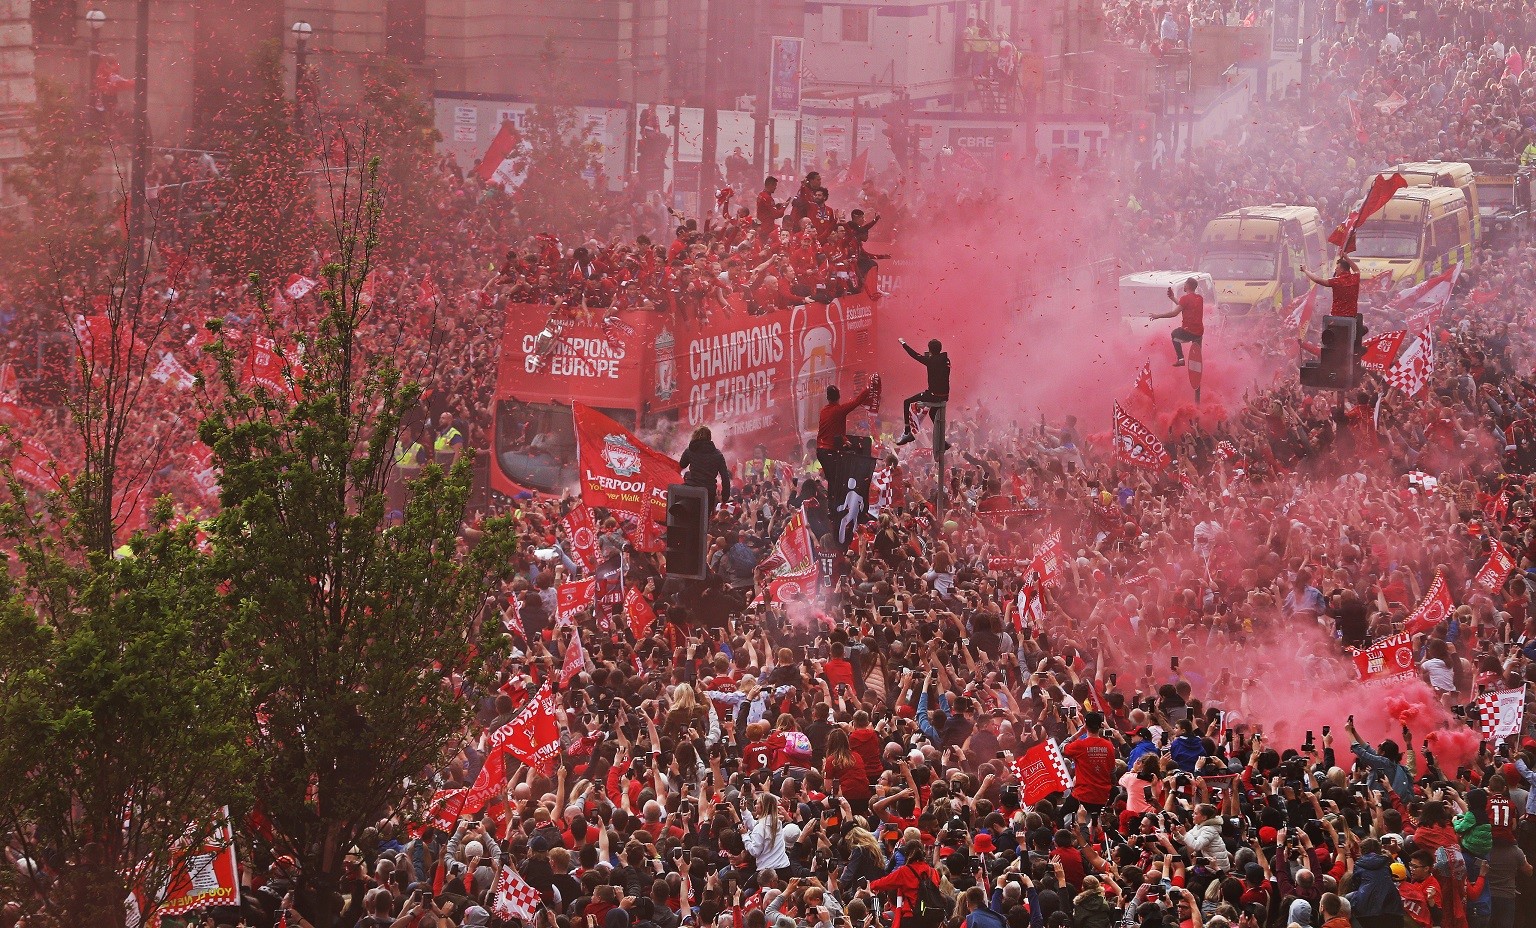 crowds surround an open top bus in 2019 with red flares for LFC Parade